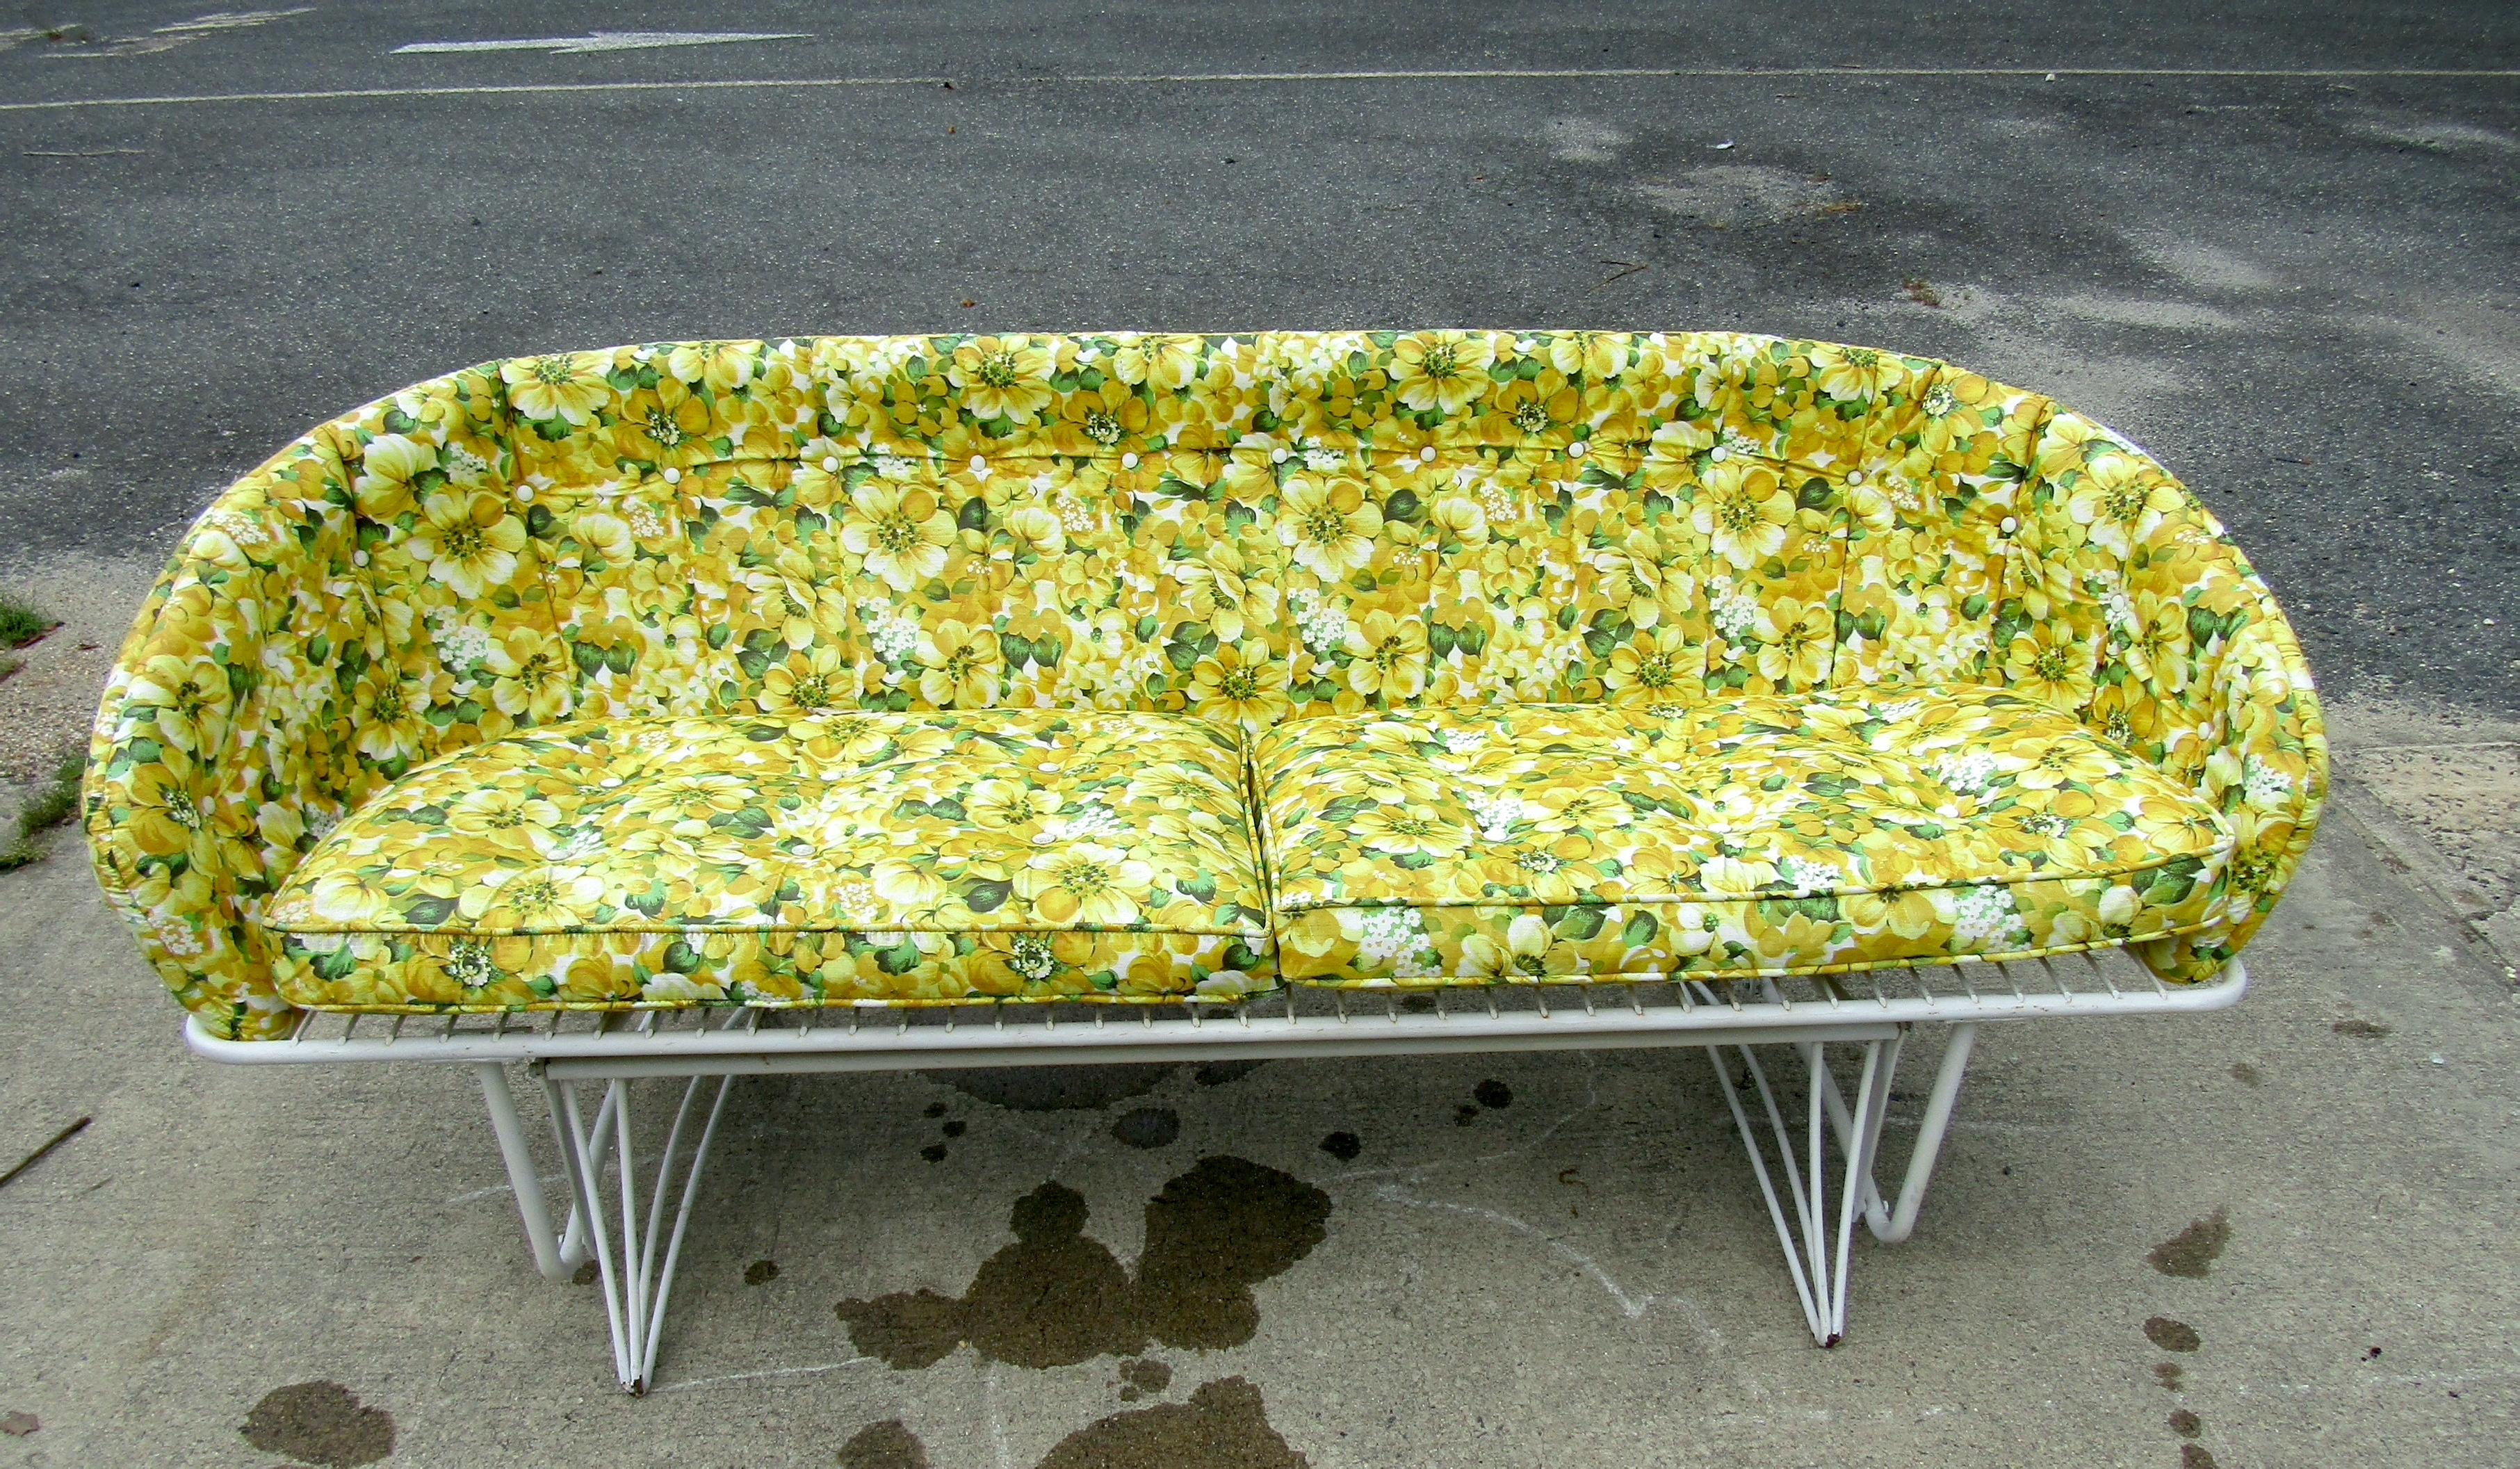 Vintage outdoor patio bench. This bench features an all metal frame with rocking base and floral seat cushions. A simple bench that would be a perfect addition to any outdoor lounge space. Please confirm location NY or NJ.